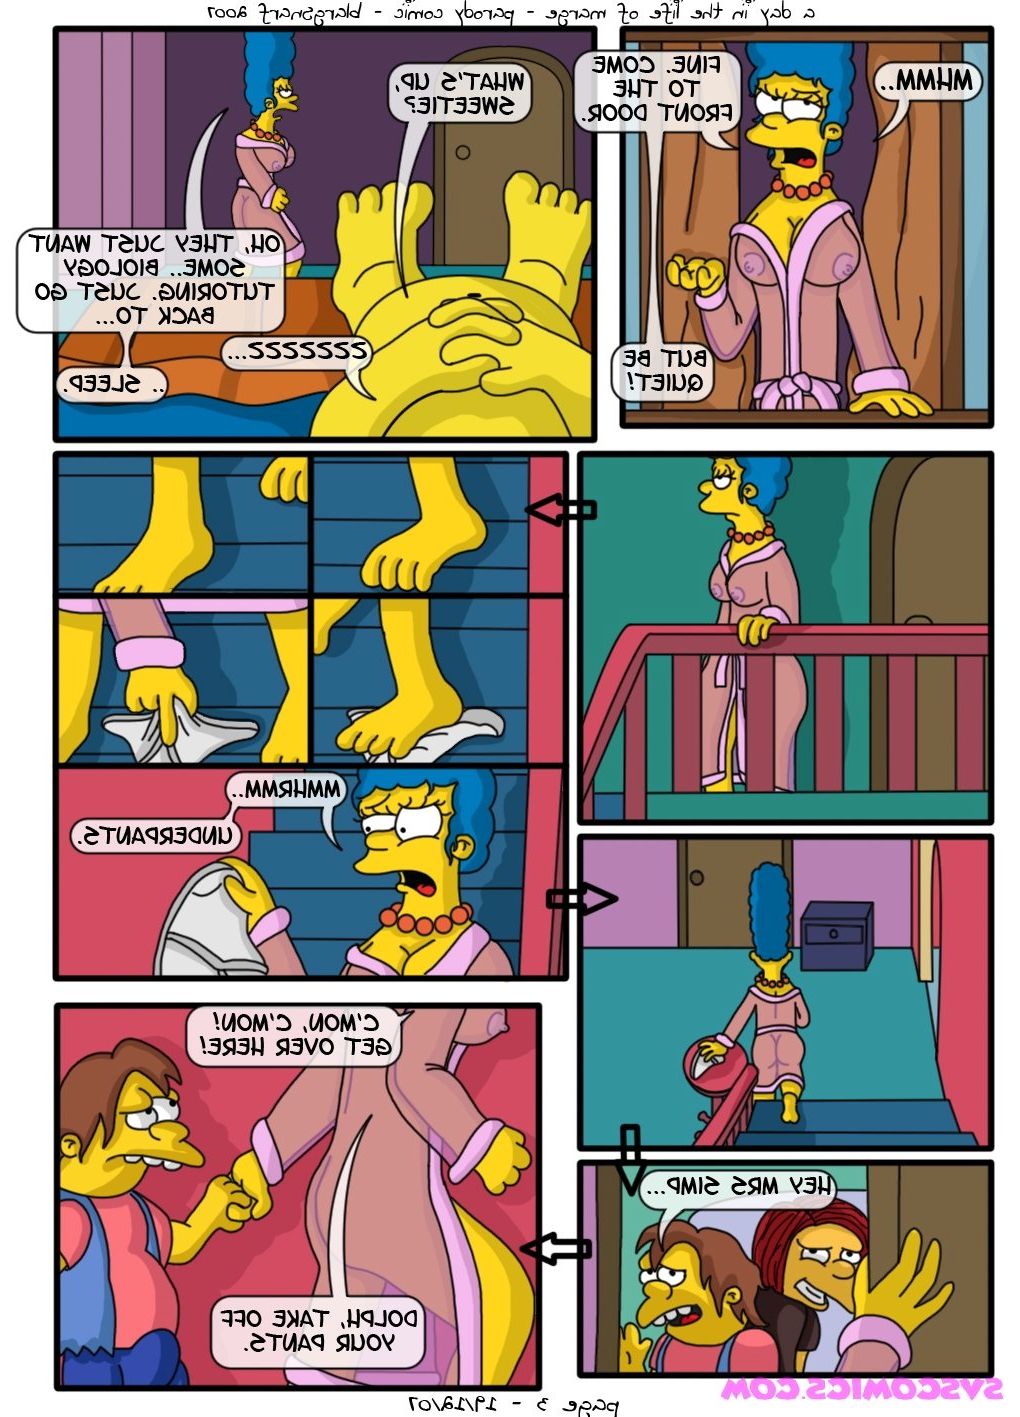 day-life-marge-simpsons image_9558.jpg